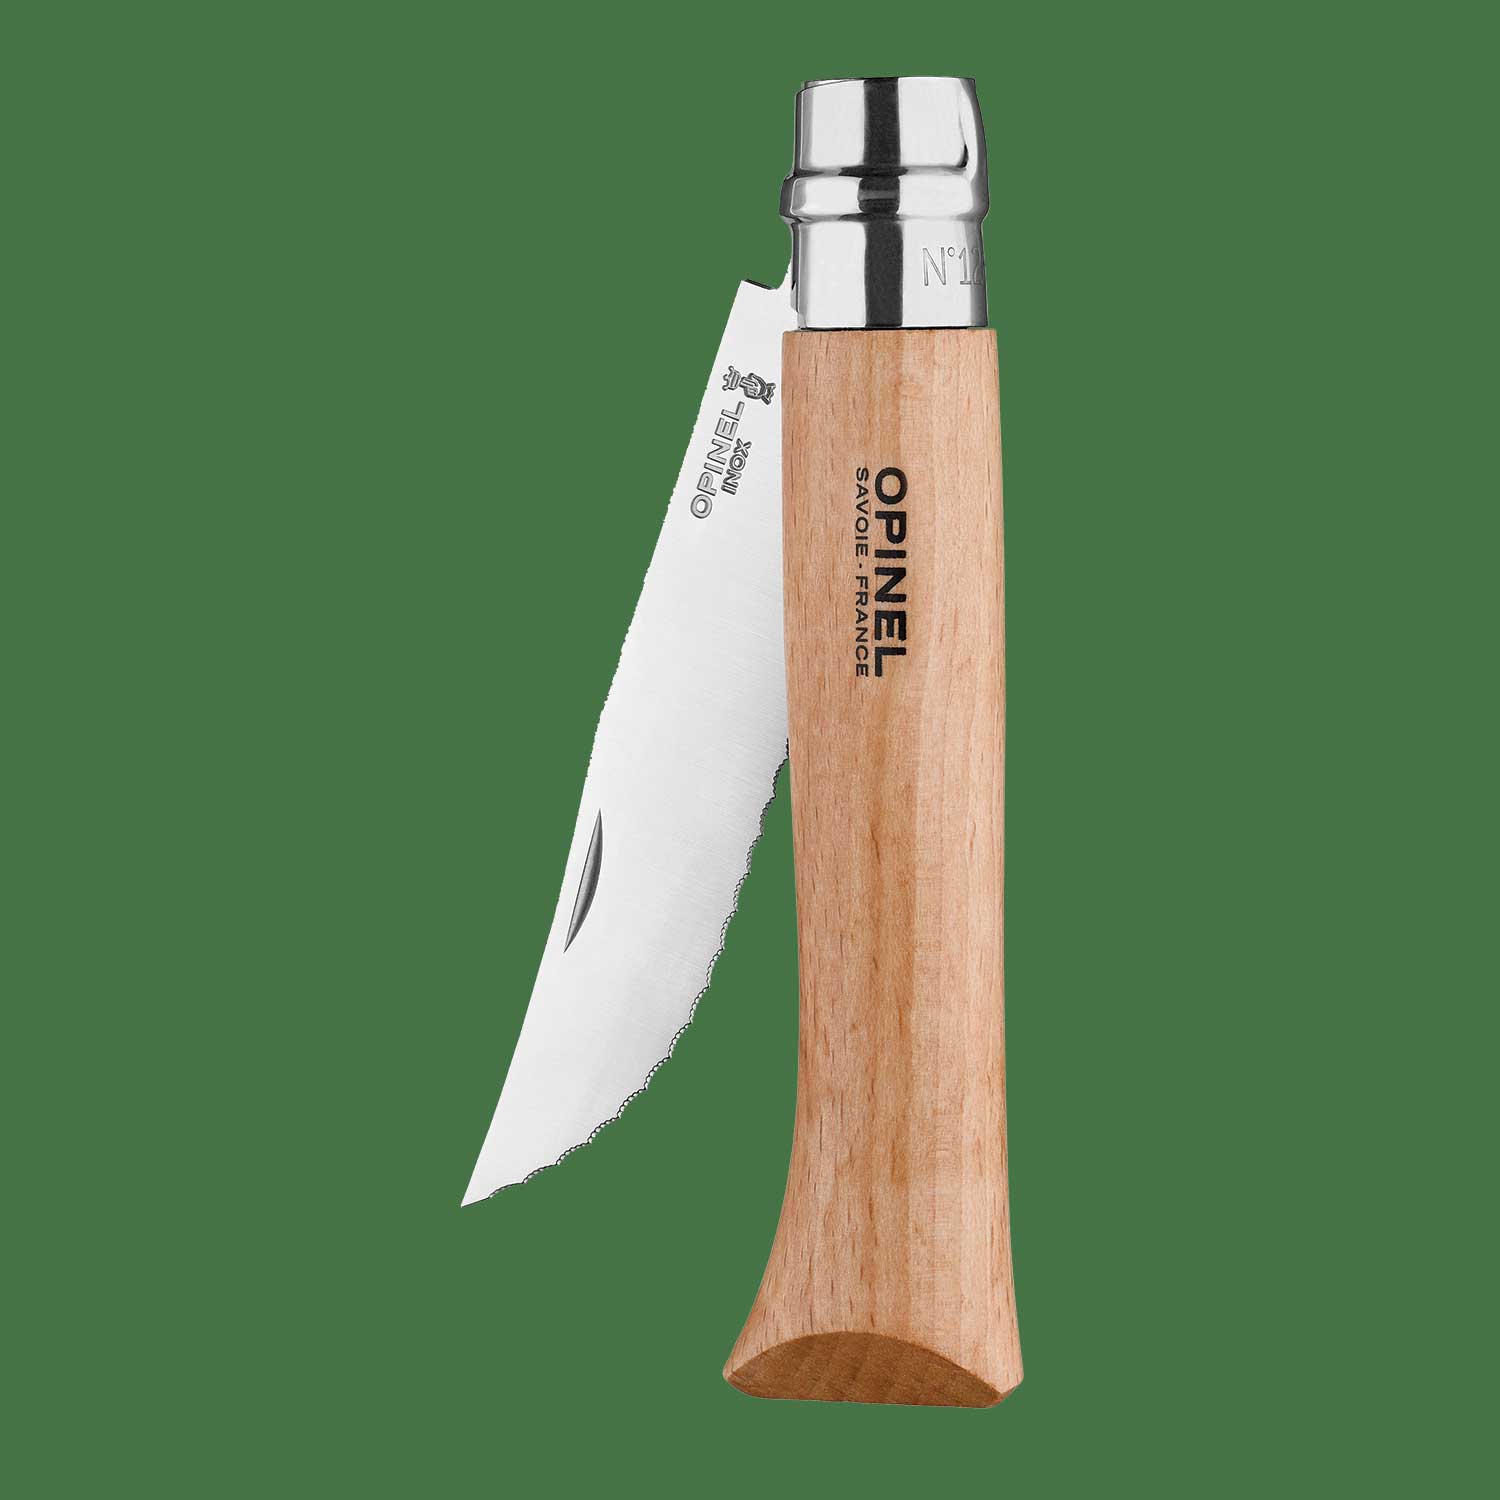  Opinel No.12 Serrated Blade Folding Knife and Kitchen Tool -  Outdoor Camp Kitchen Folding Knife : Sports & Outdoors